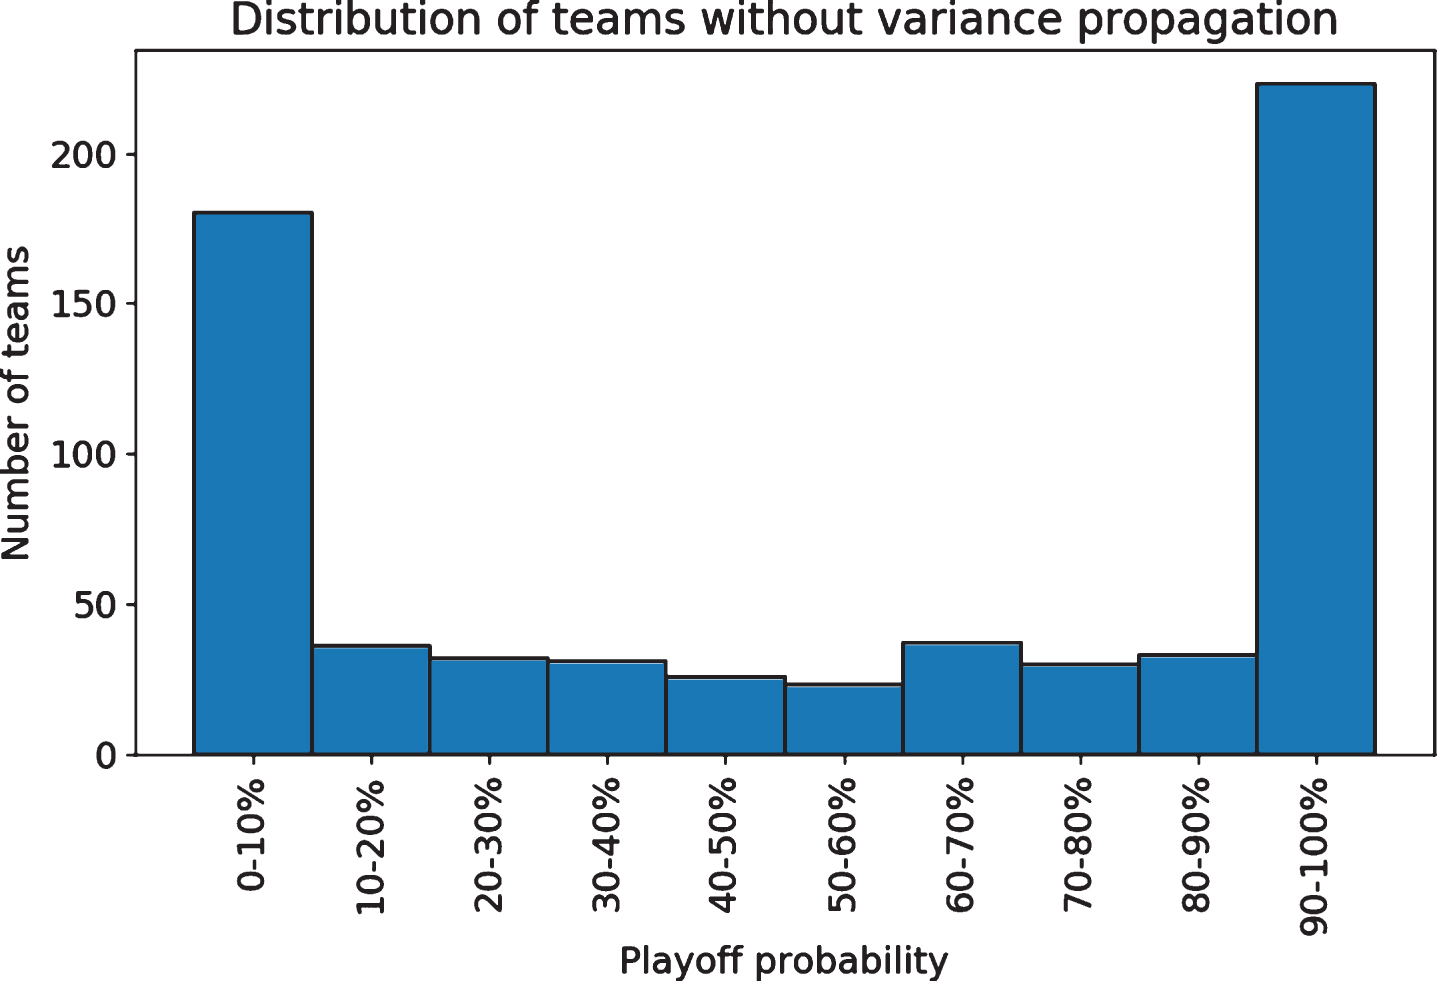 The model offers extremely low or high probabilities for many team seasons.